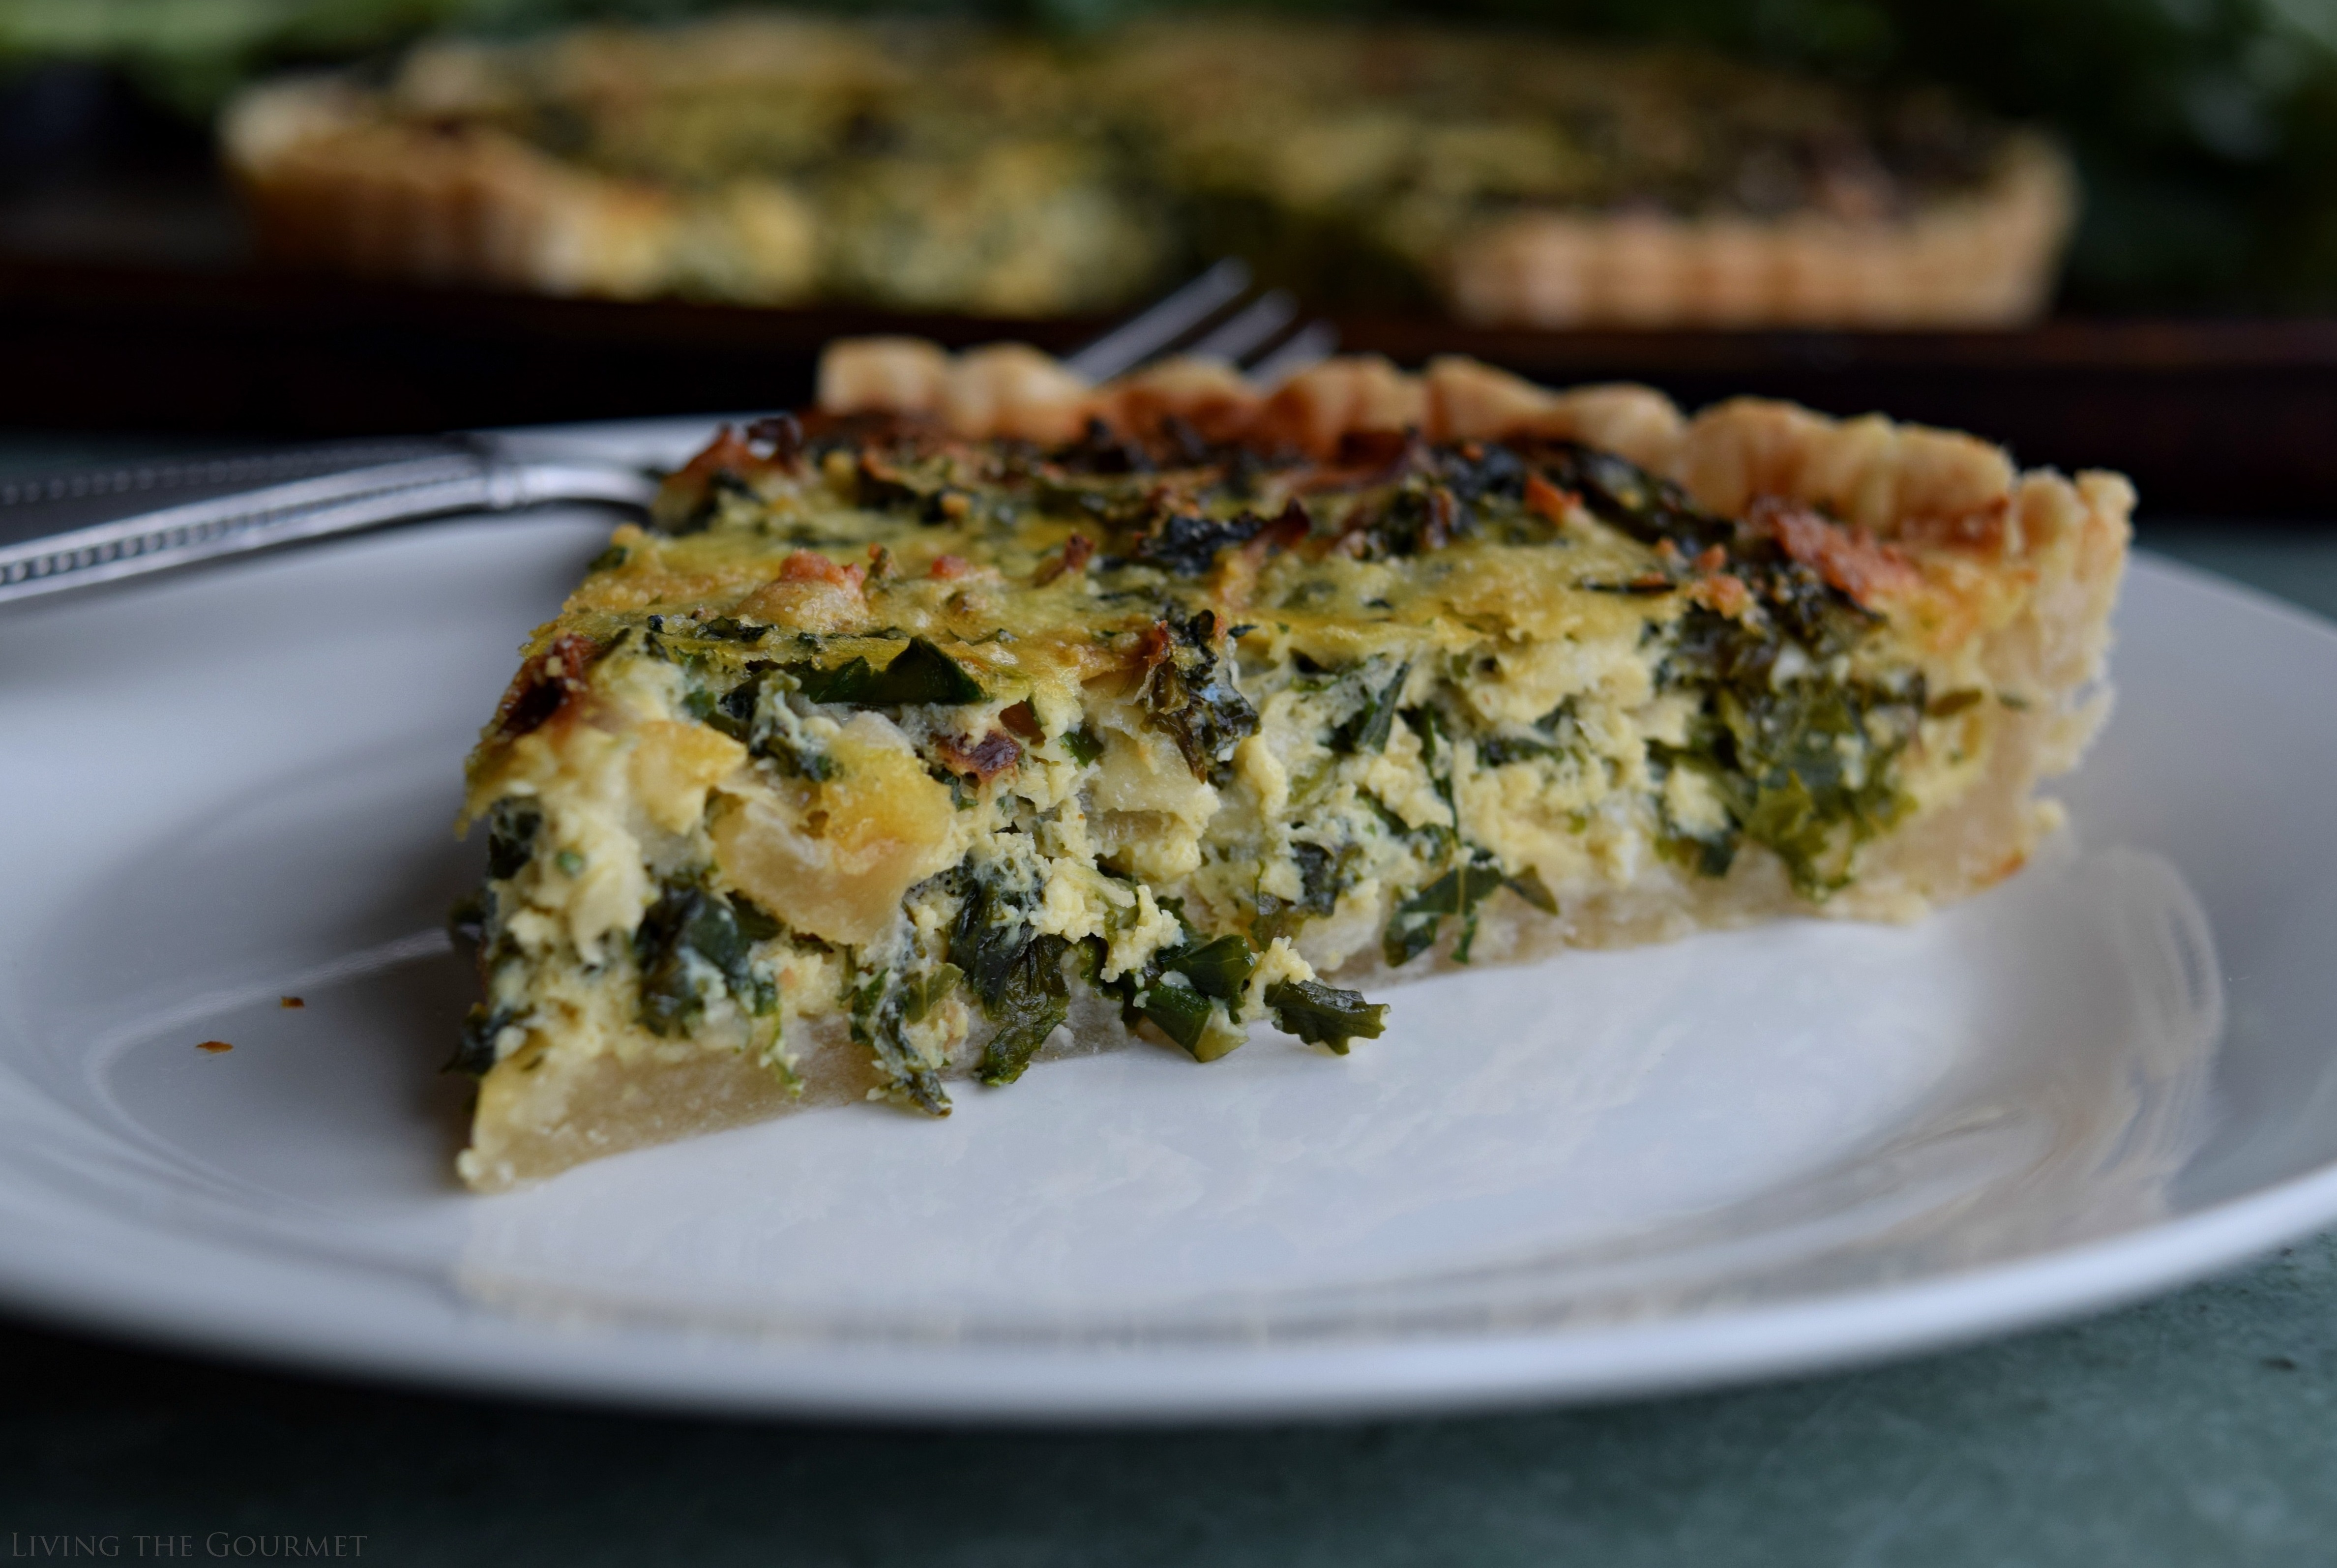 Living the Gourmet: Kale and Provolone Quiche